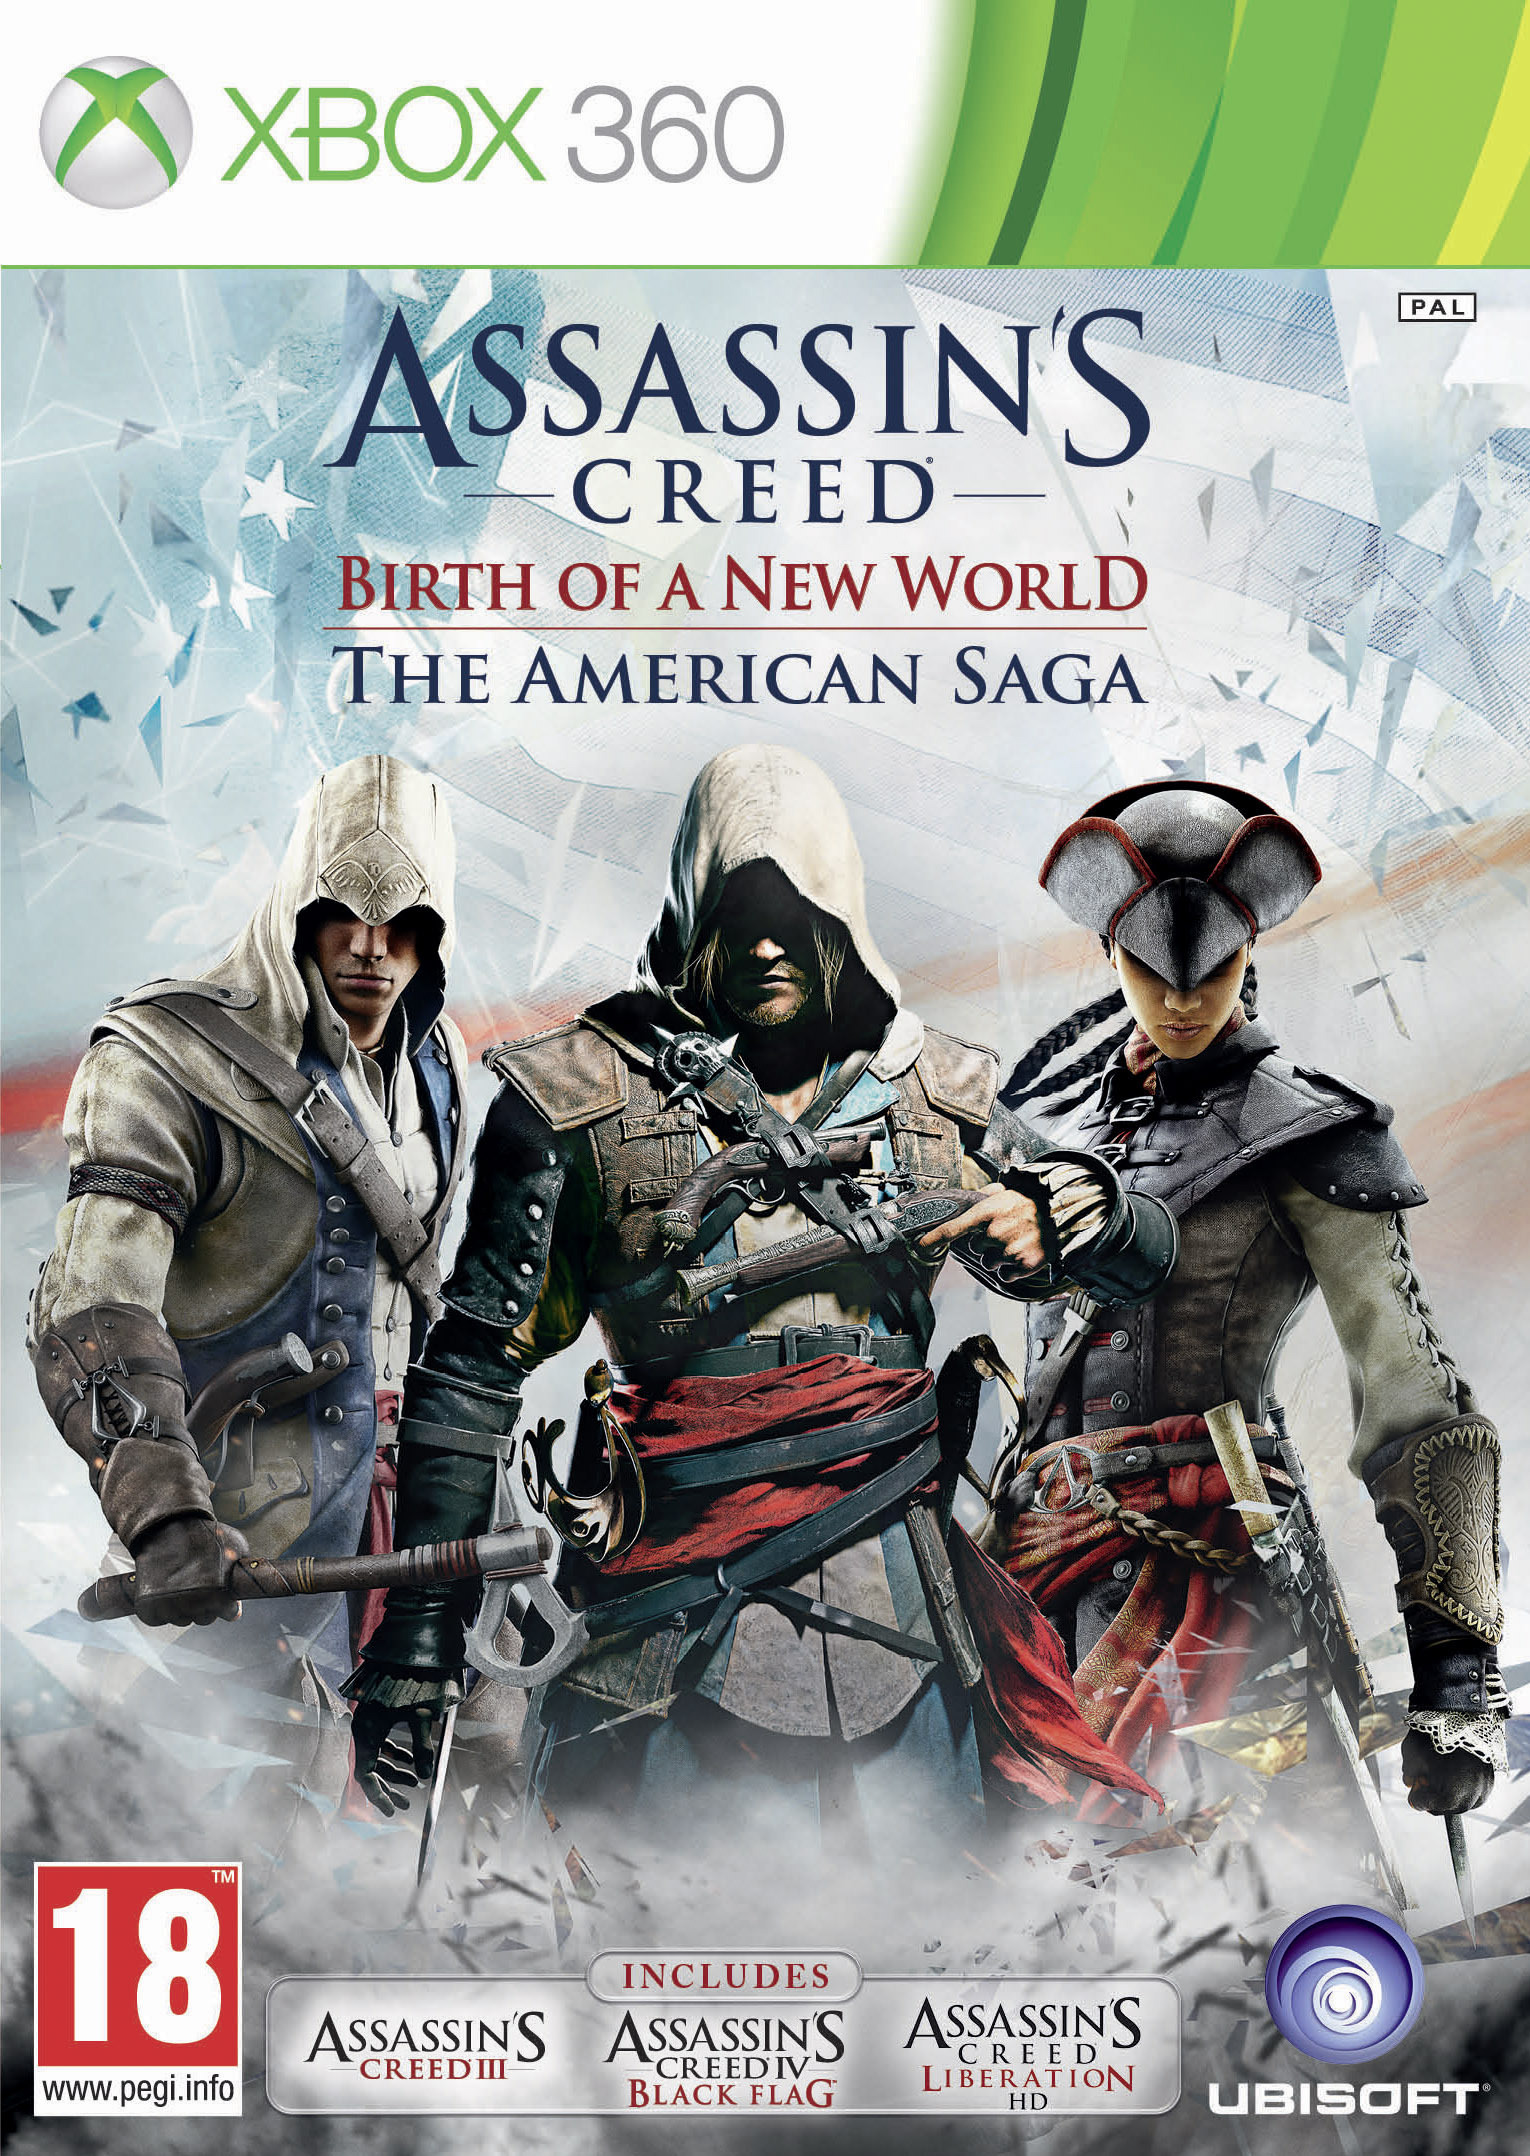 Assassin's Creed: Birth of a New World – The American Saga til Xbox 360